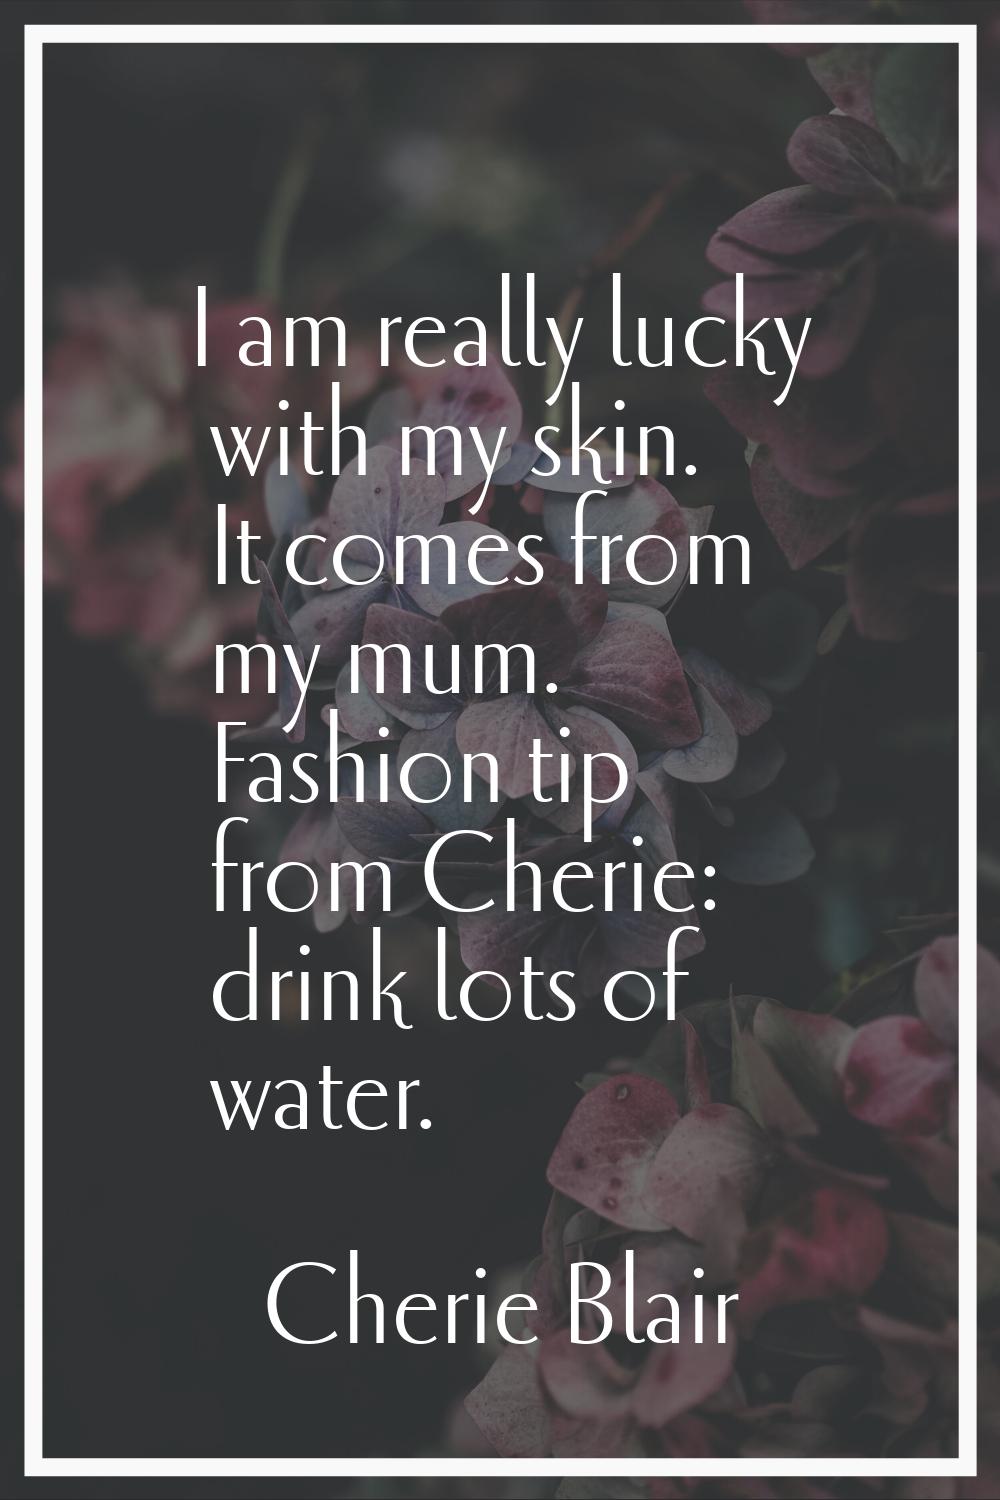 I am really lucky with my skin. It comes from my mum. Fashion tip from Cherie: drink lots of water.